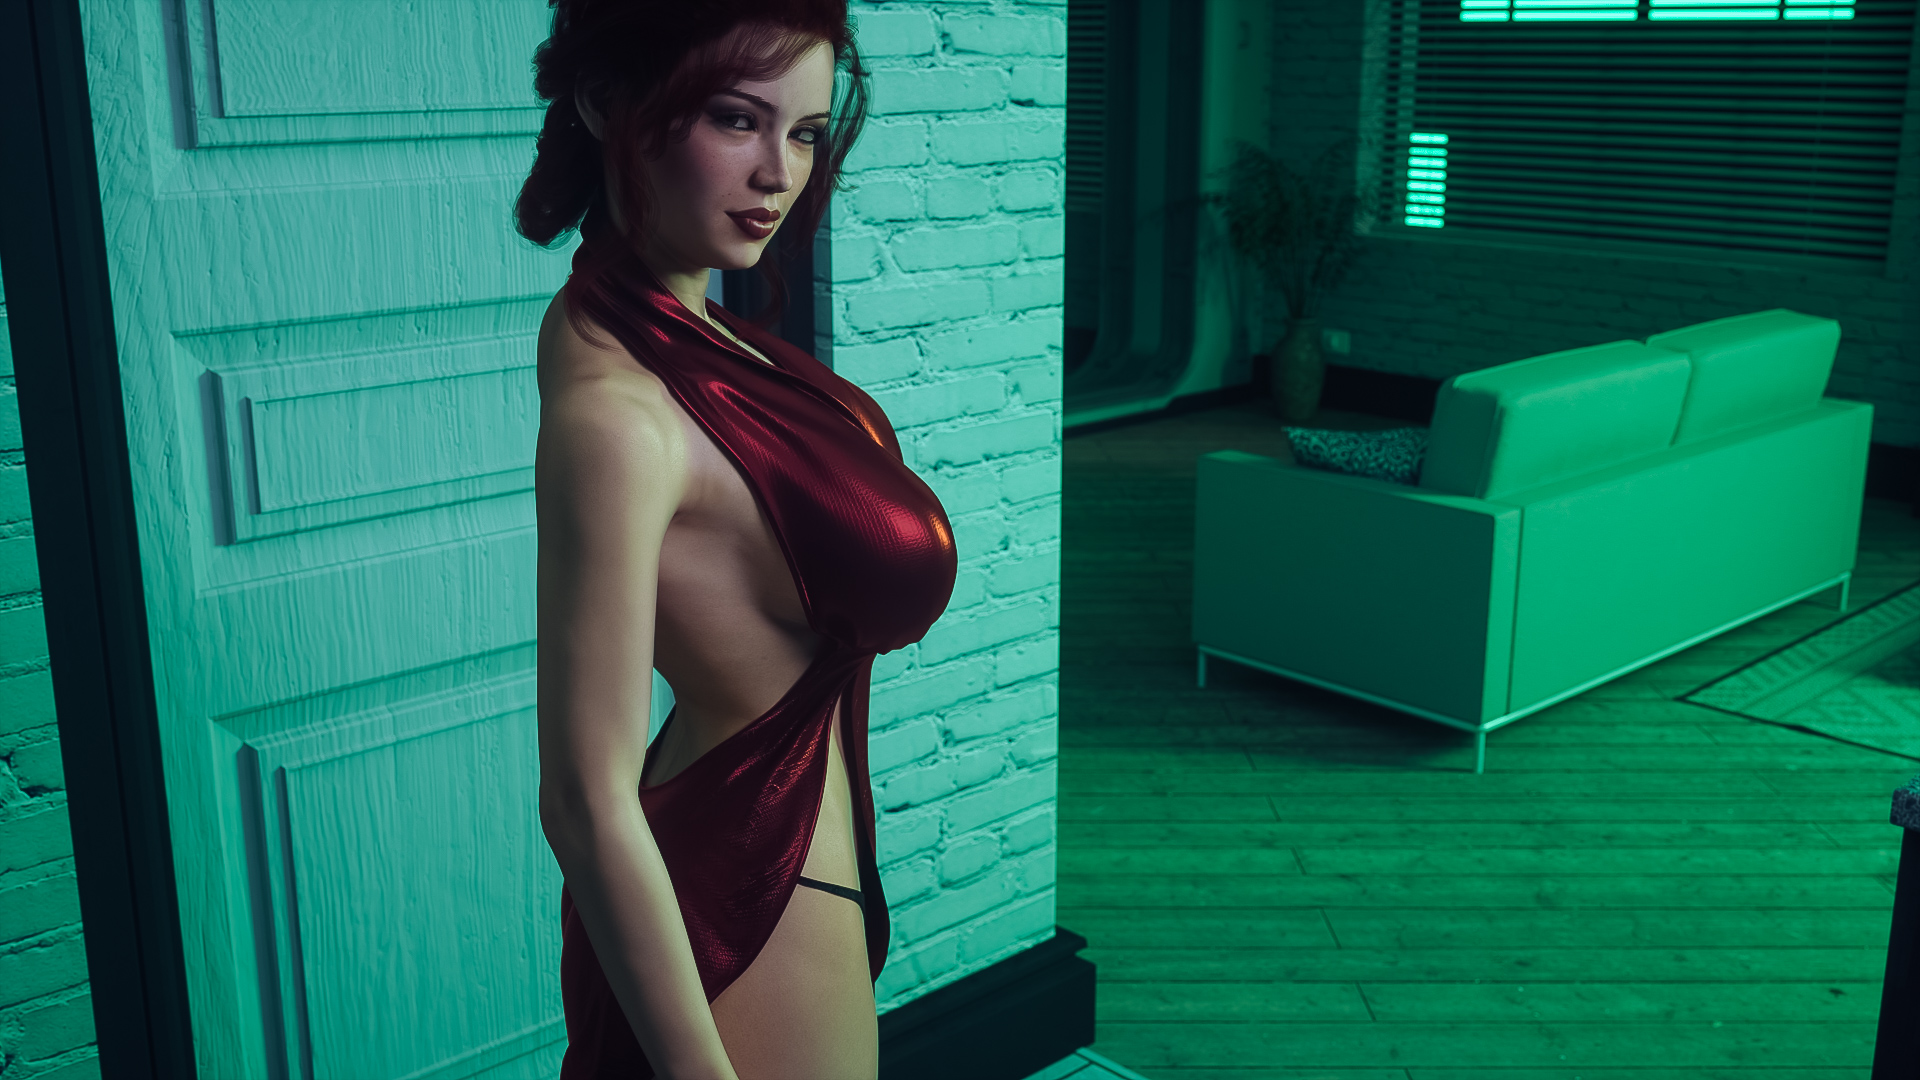 General 1920x1080 city of broken dreamers adult games women red dress panties Victoria Shields video games video game characters